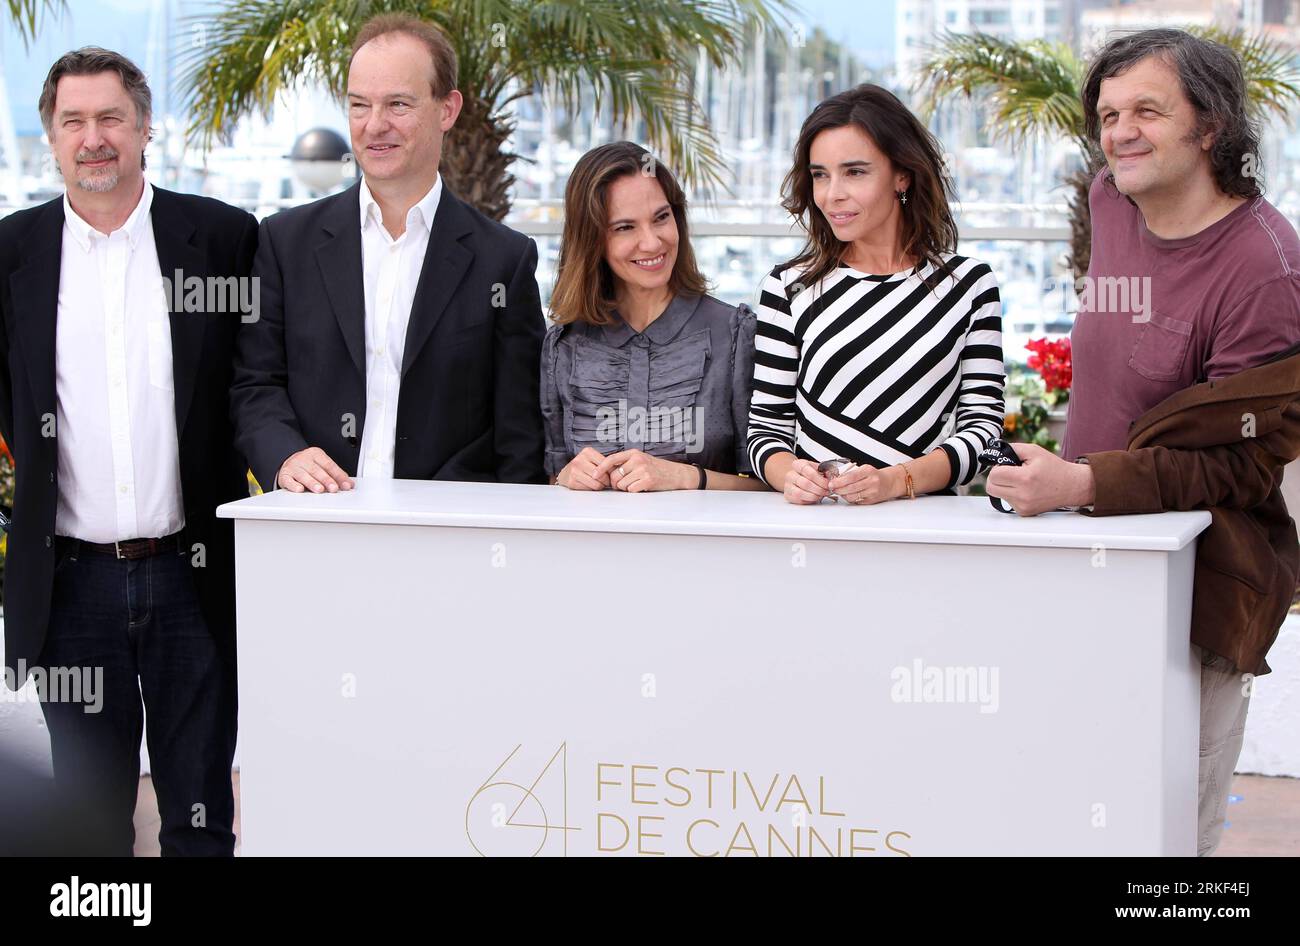 Bildnummer: 55341626  Datum: 12.05.2011  Copyright: imago/Xinhua (110512)-- CANNES, May 12, 2011 (Xinhua) -- (From L to R) US Chief Creative Officer-Tribeca Enterprises Geoffroy Gilmore, British critic Peter Bradshaw, Mexican director of the Morelia Festival Daniela Michel, French actress Elodie Bouchez and Serbian director and President of the jury Emir Kusturica pose during the photocall of the Un Certain Regard jury of the 64th Cannes Film Festival on May 12, 2011 in Cannes, France. (Xinhua/Gao Jing)(zf) FRANCE-CANNES-FILM FESTIVAL-UN CERTAIN REGARD-JURY-PHOTOCALL PUBLICATIONxNOTxINxCHN Kul Stock Photo